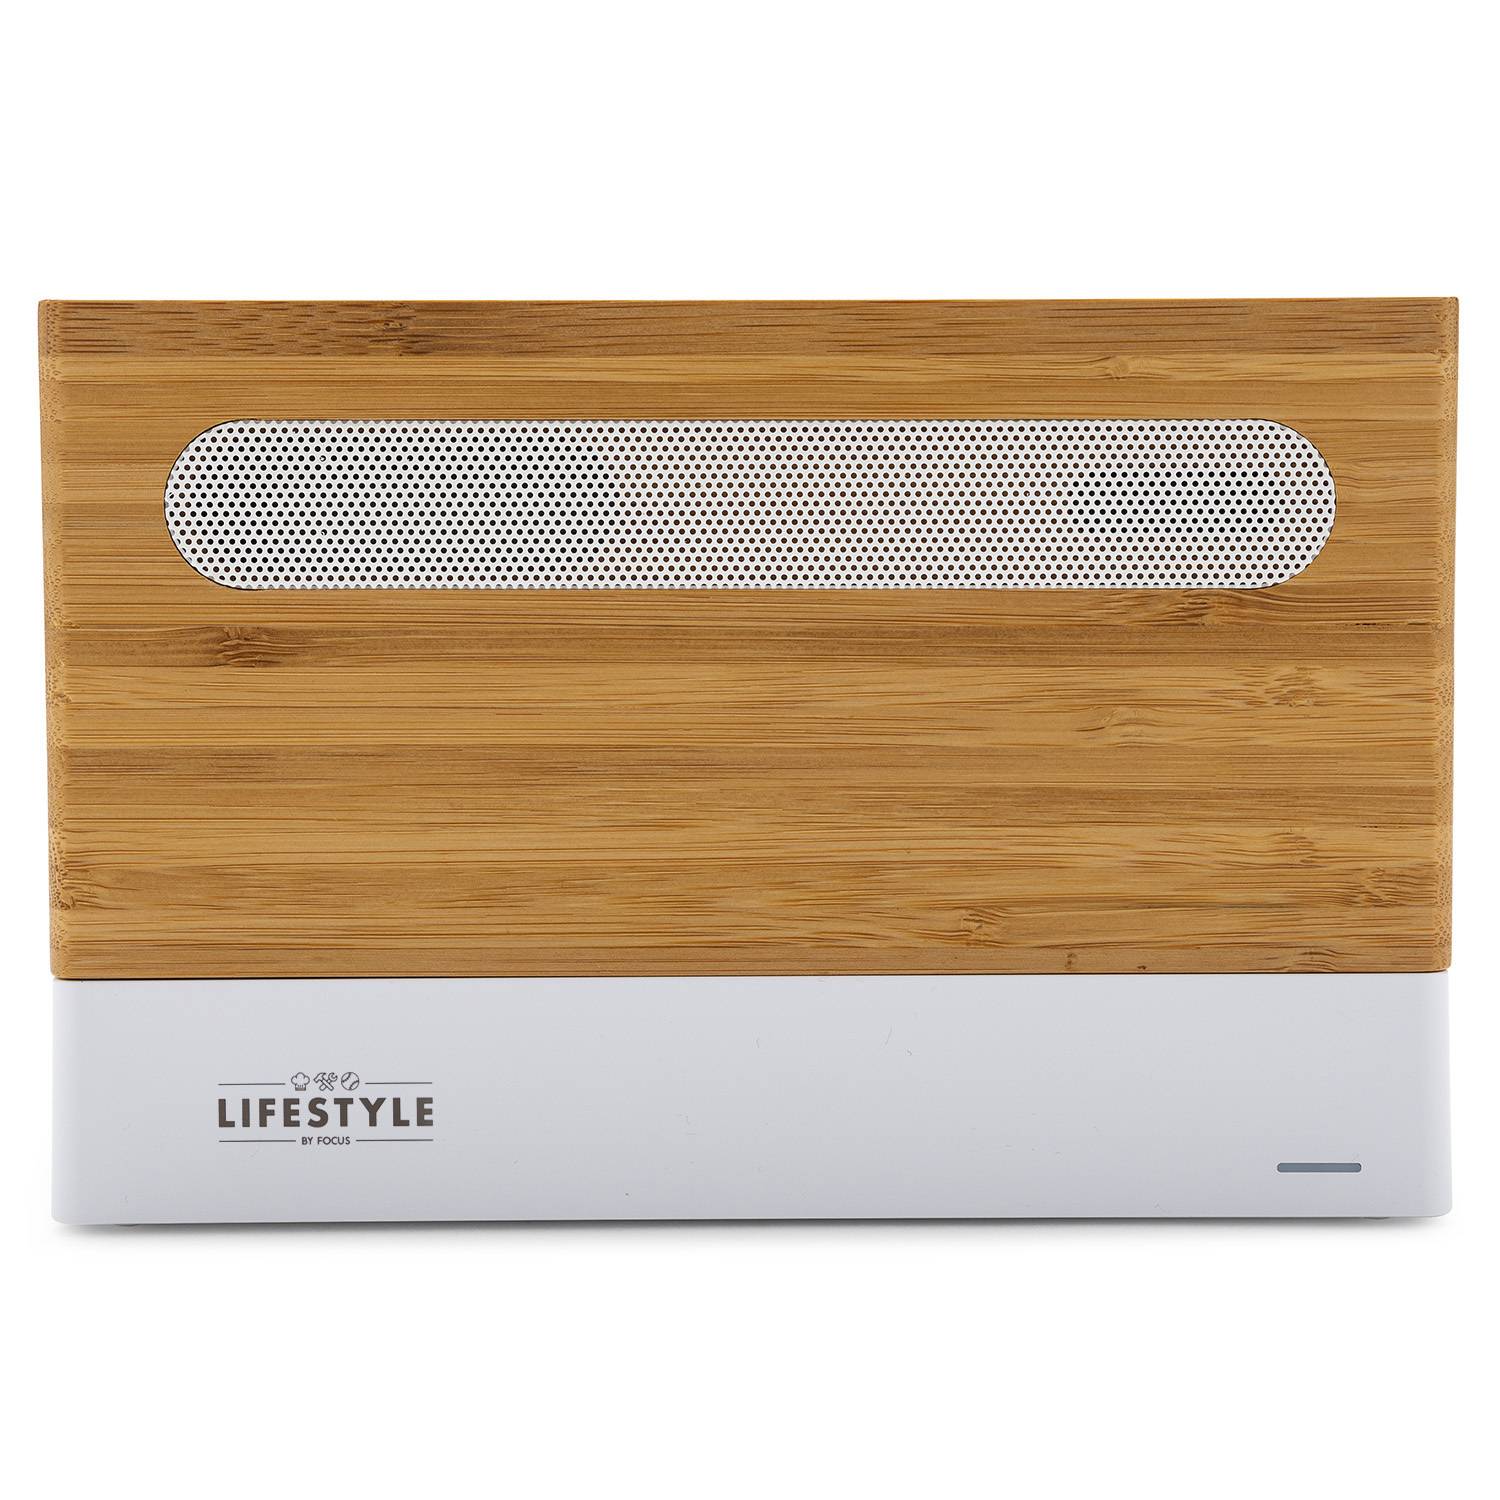 Lifestyle by Focus Smartphone UV Sanitizer and Stand with Bamboo Cover, LED Indicator and Universal Charging